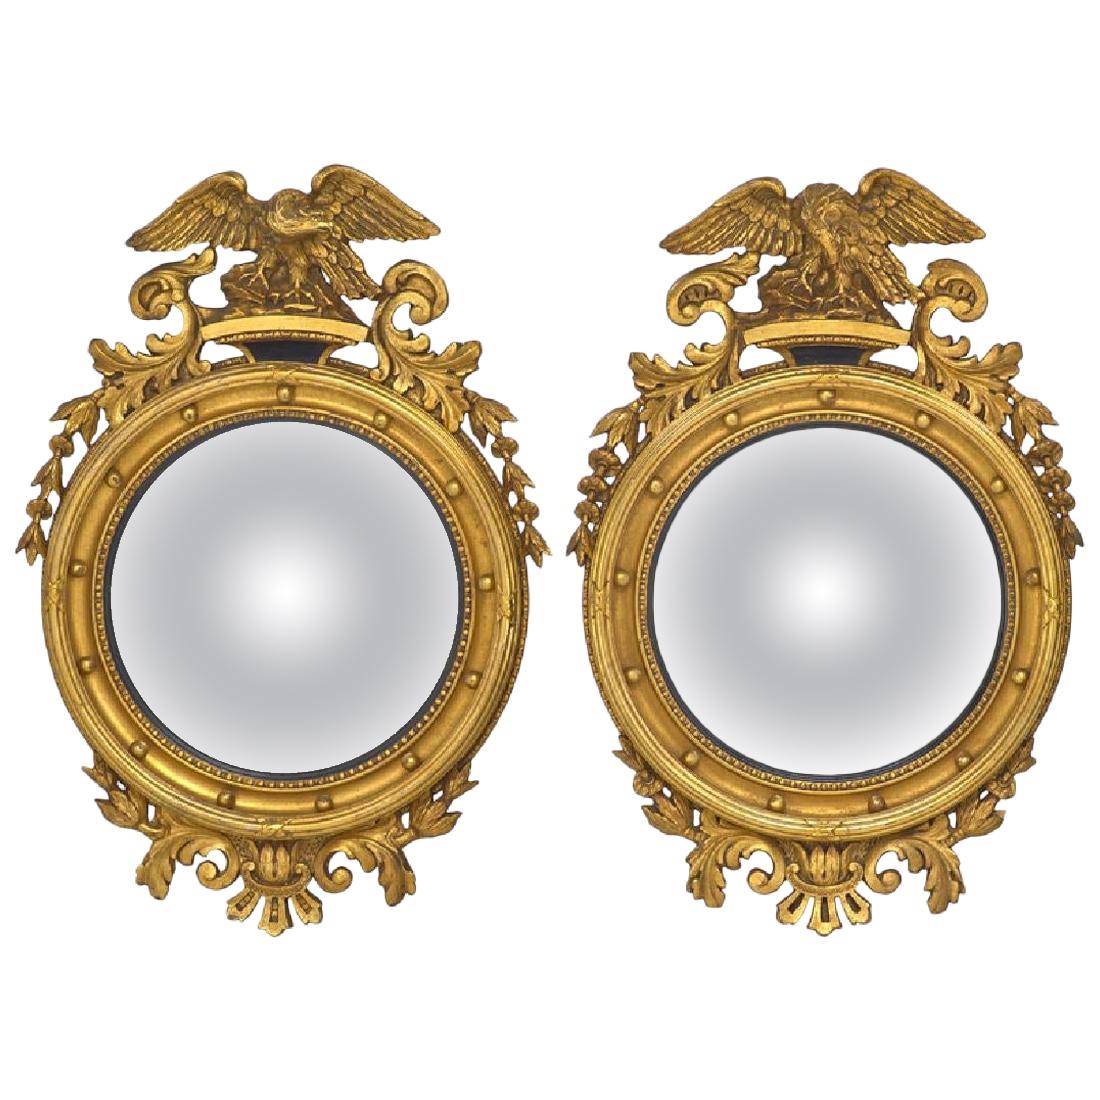 American Federal Style Round Convex Giltwood Mirrors with Opposing Eagles, Pair